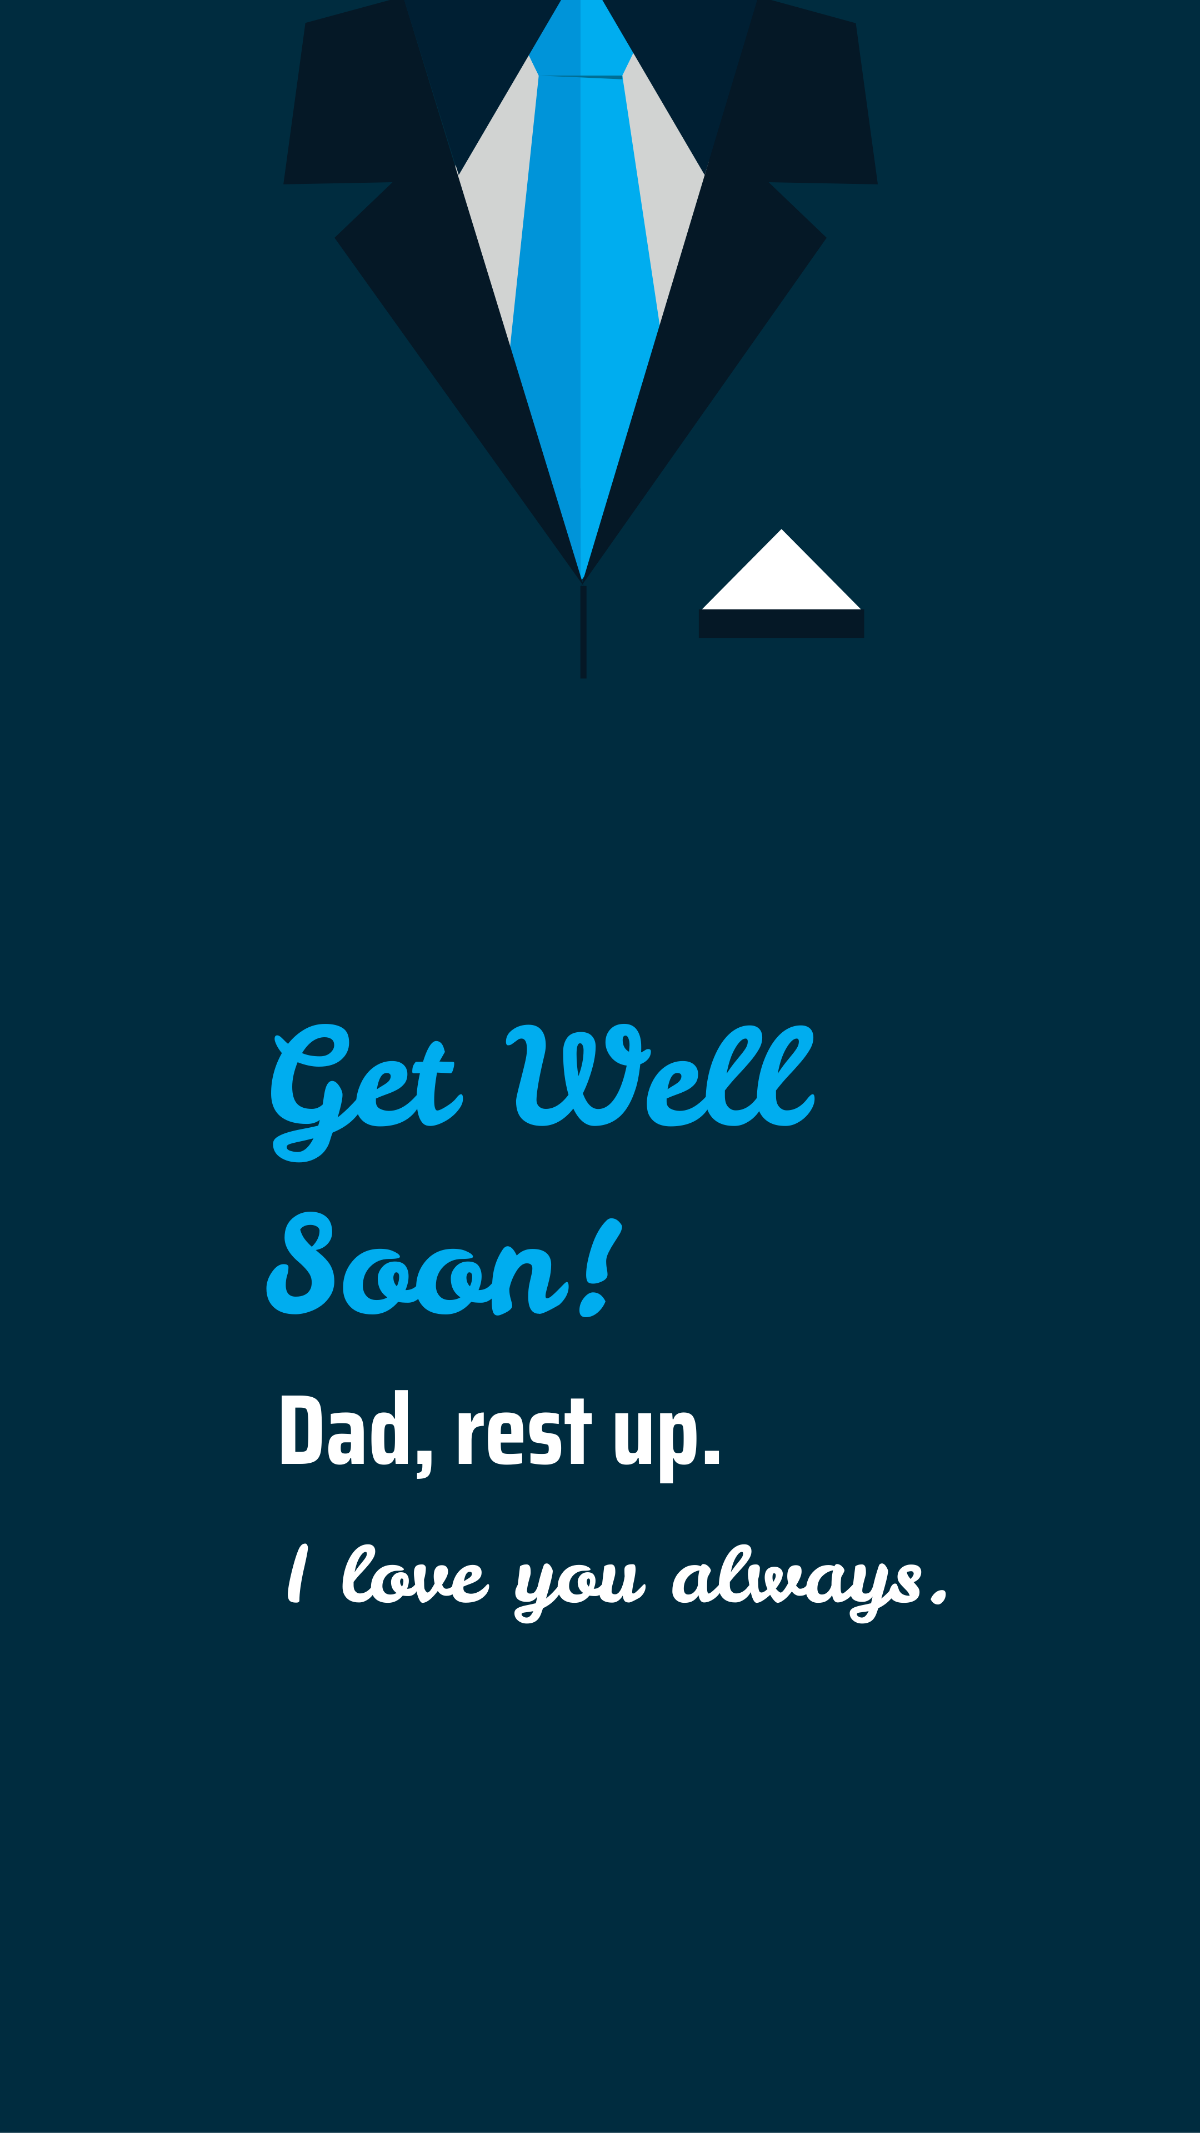 Get Well Soon Message For Dad Template